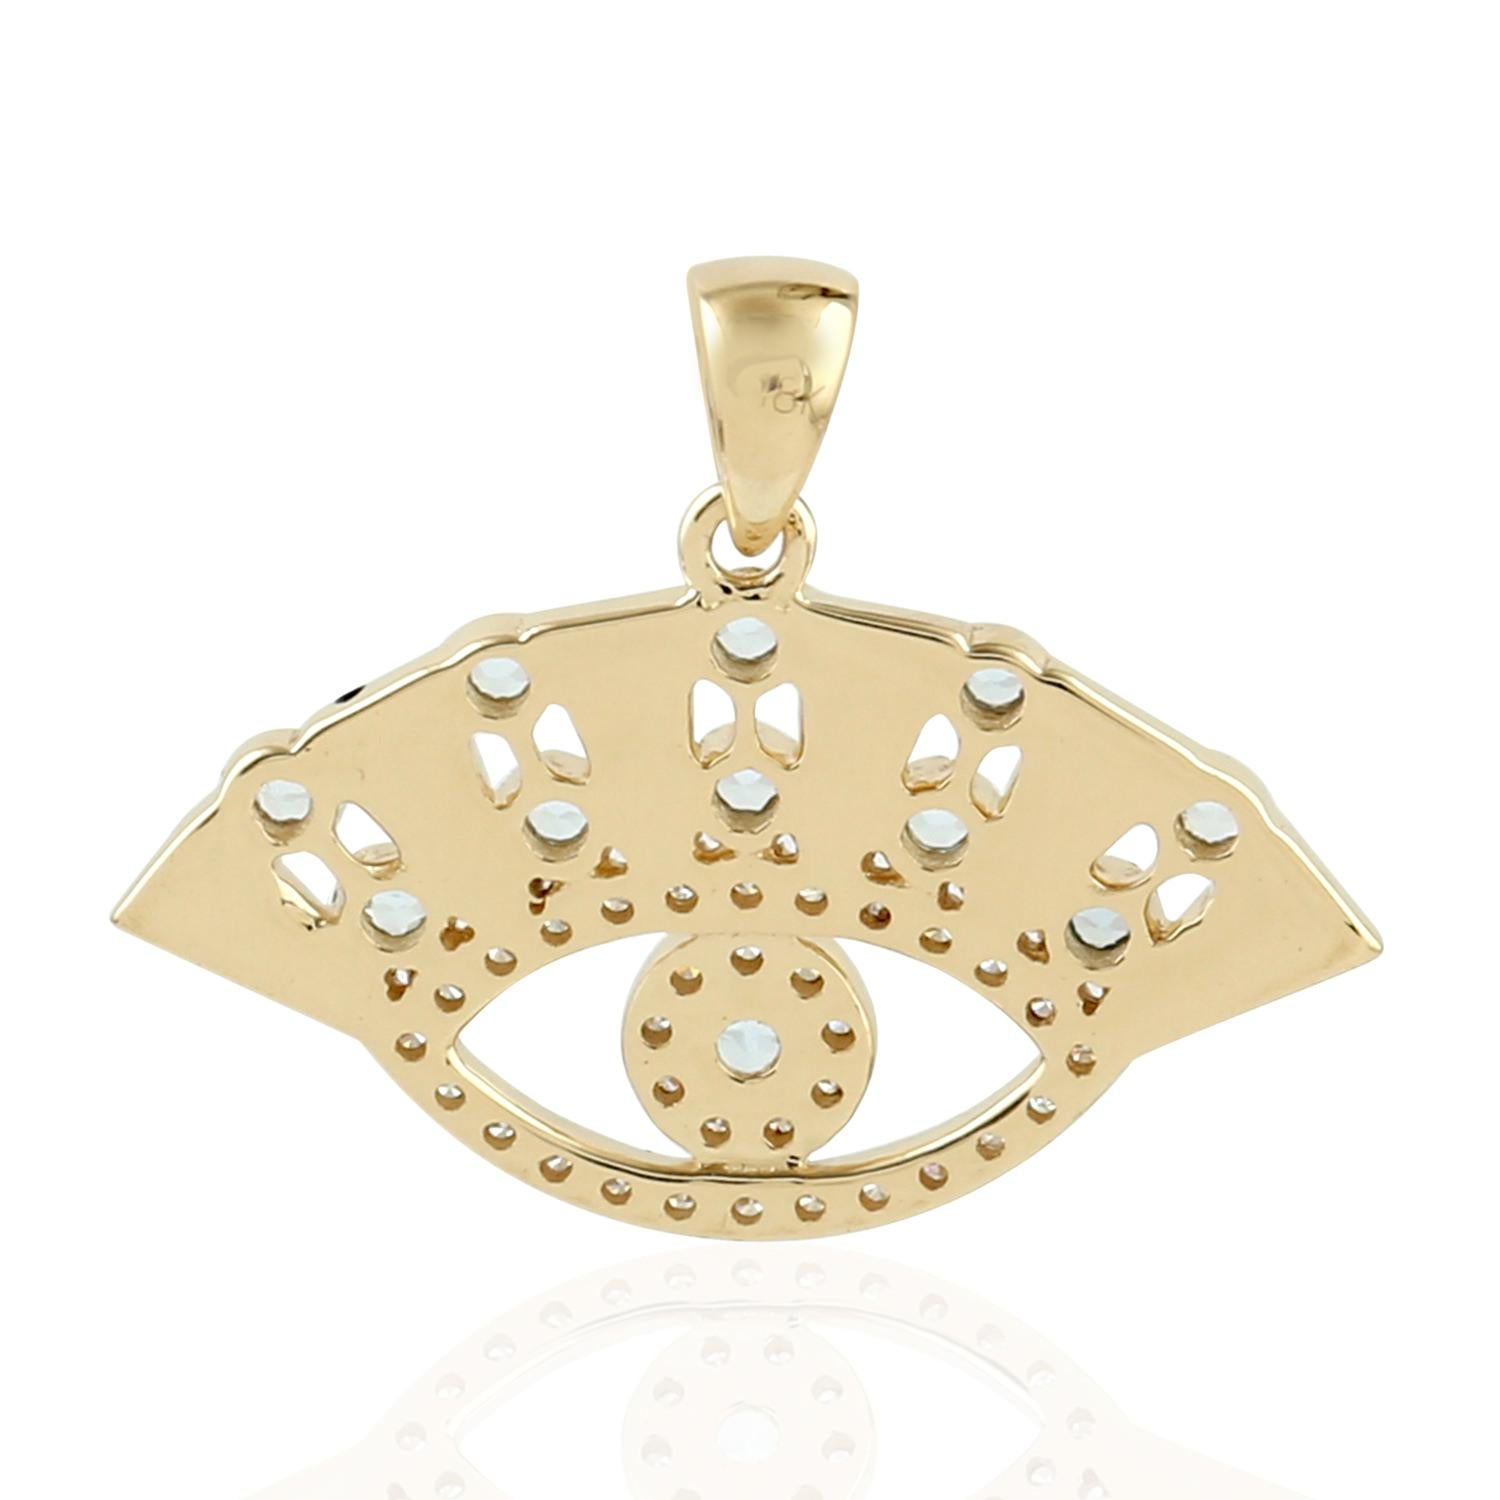 The 14 karat gold enamel pendant is set with .15 carats topaz and .14 carats of shimmering diamonds. Evil Eye symbolizes to ward off negative energy.  It promises to keep you safe and sound, which is the most important thing when it comes to